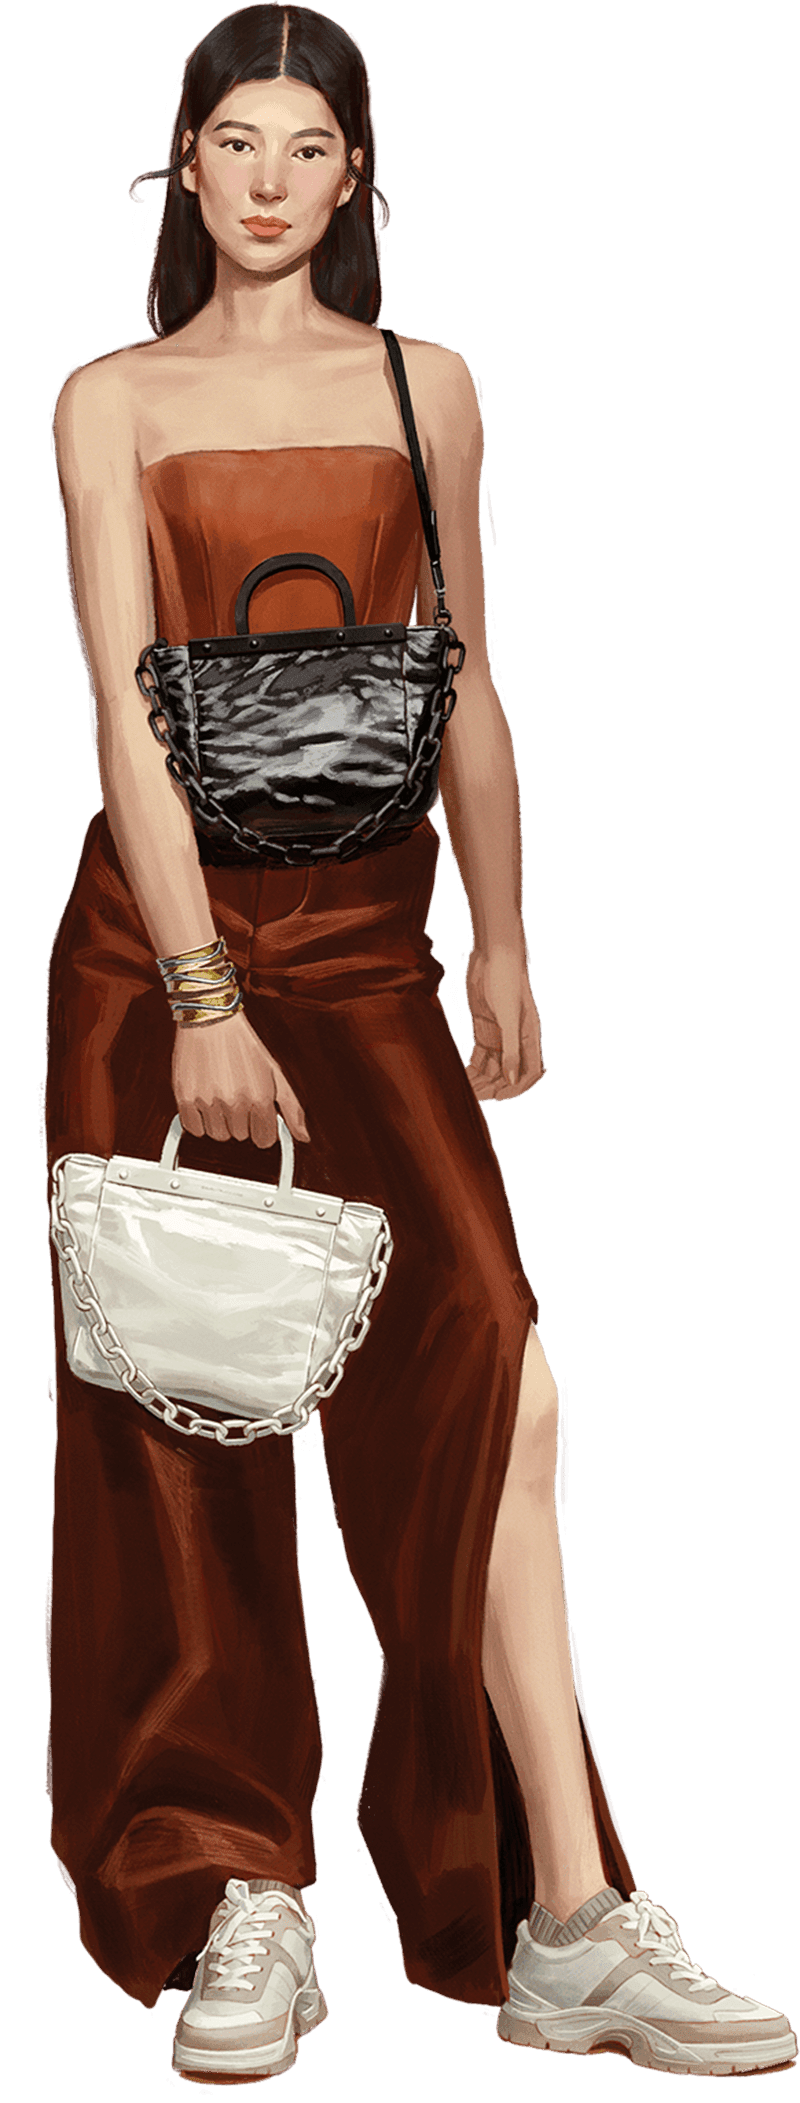 A compilation of illustrations from the CHARLES & KEITH Autumn Winter 2020 campaign - CHARLES & KEITH - Web - Model 3